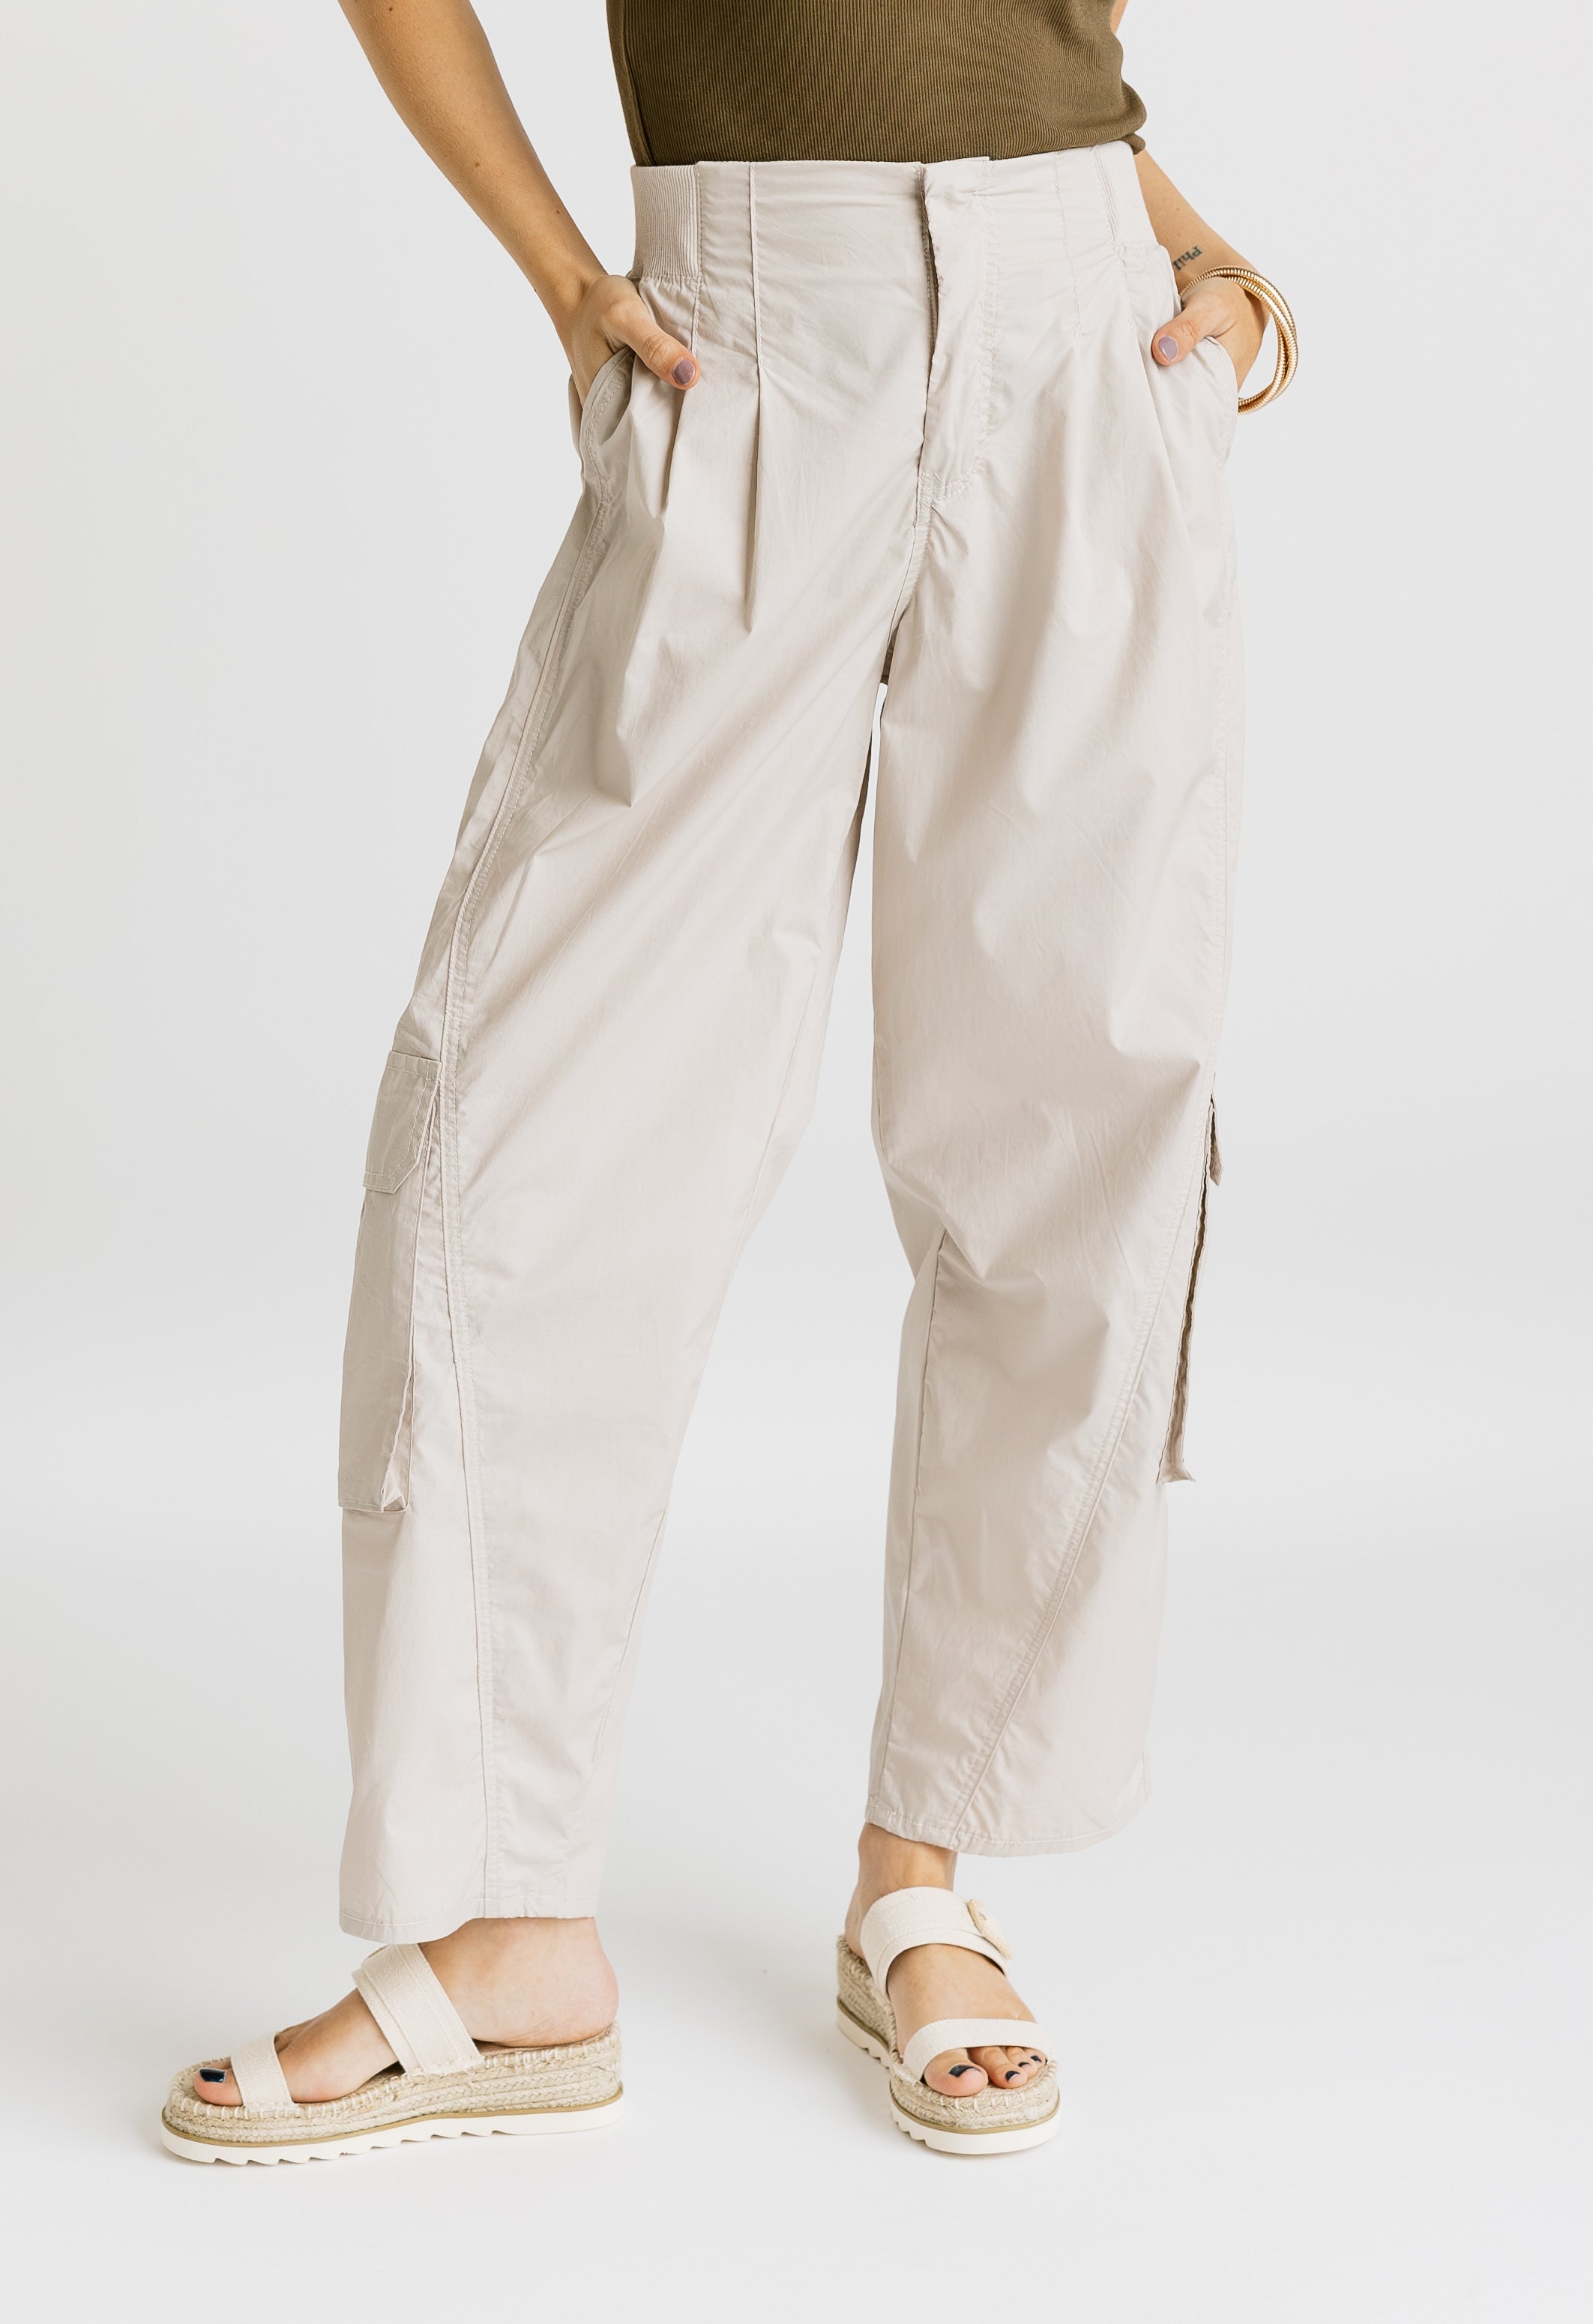 Atlas Cargo Pants - DUST - willows clothing CARGO PANT